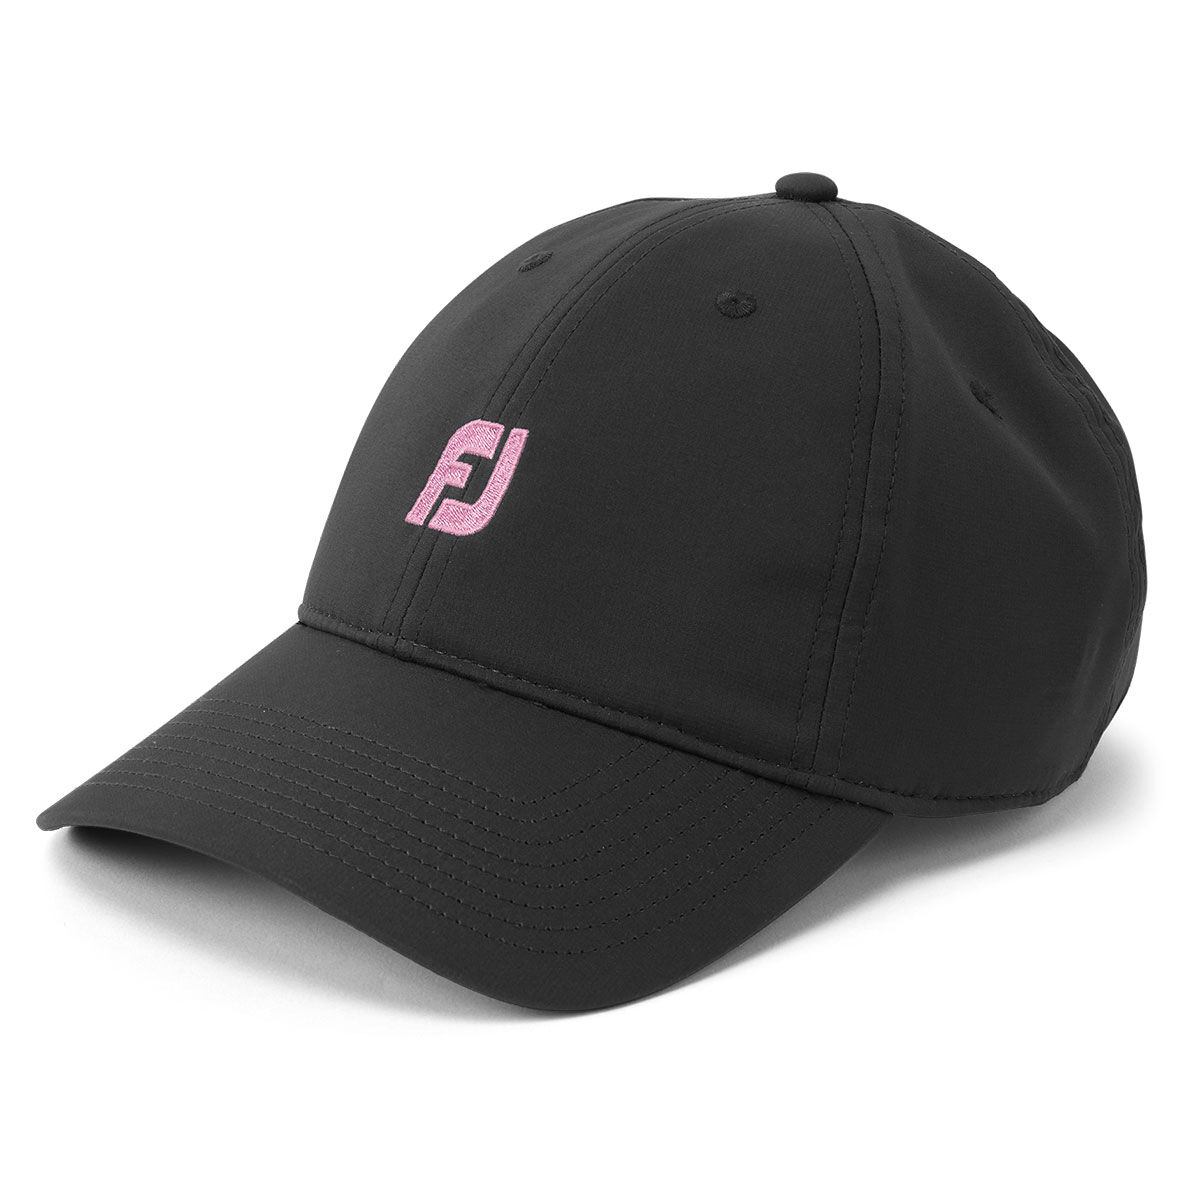 FootJoy Men’s Black and Pink Comfortable Embroidered FJ Golf Cap | American Golf, One Size